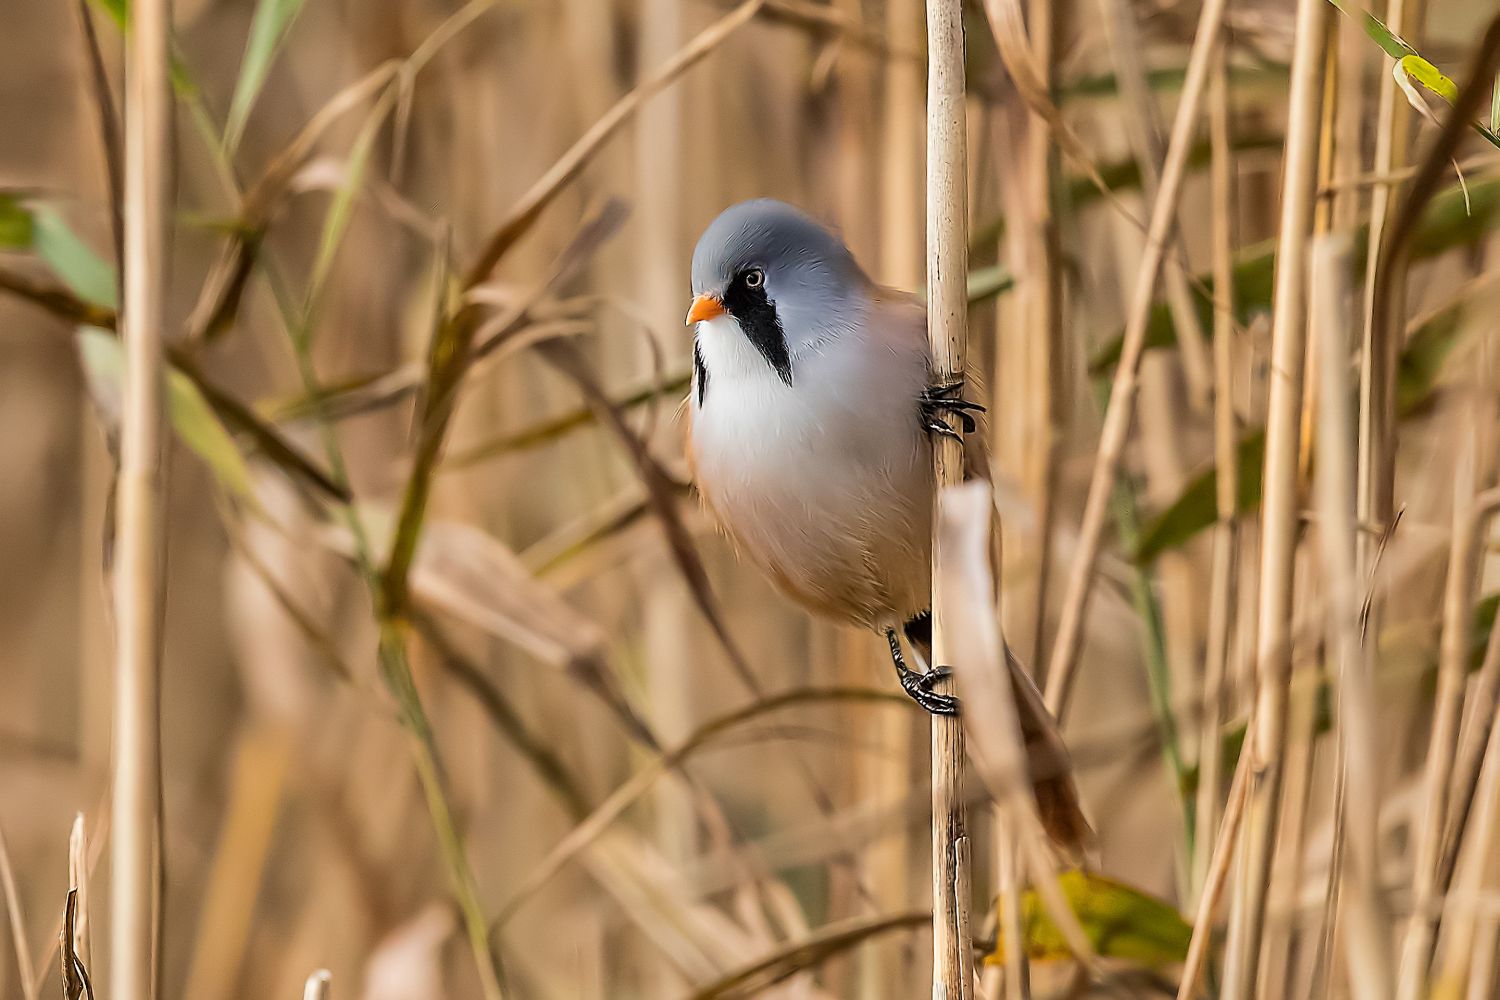 Male Bearded Tit on reeds at Leighton Moss RSPB Centre, Silverdale,Lancashire